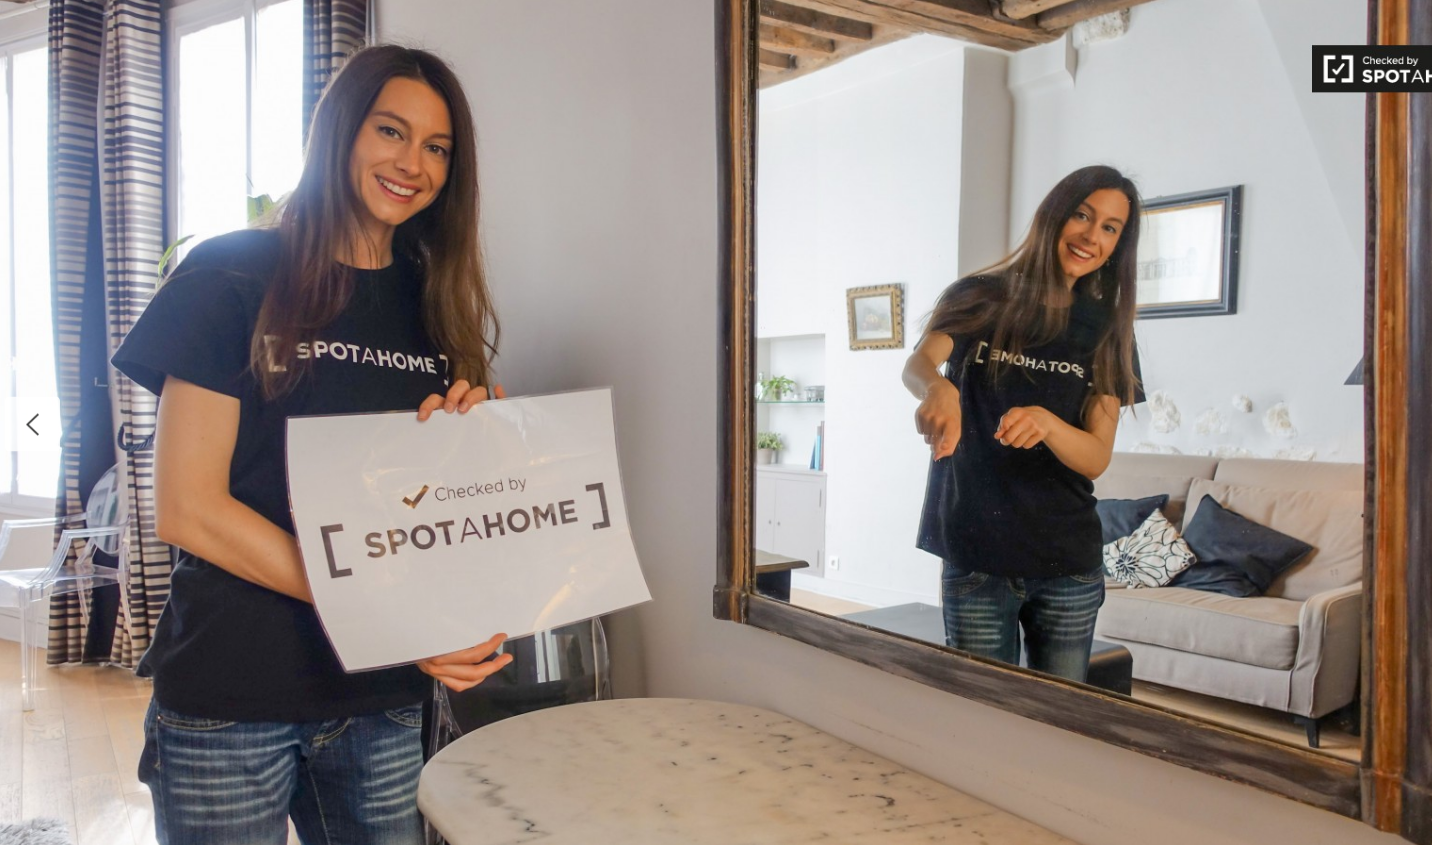 Spotahome raises €13.6M to let you view and book mid to long-term accommodation online